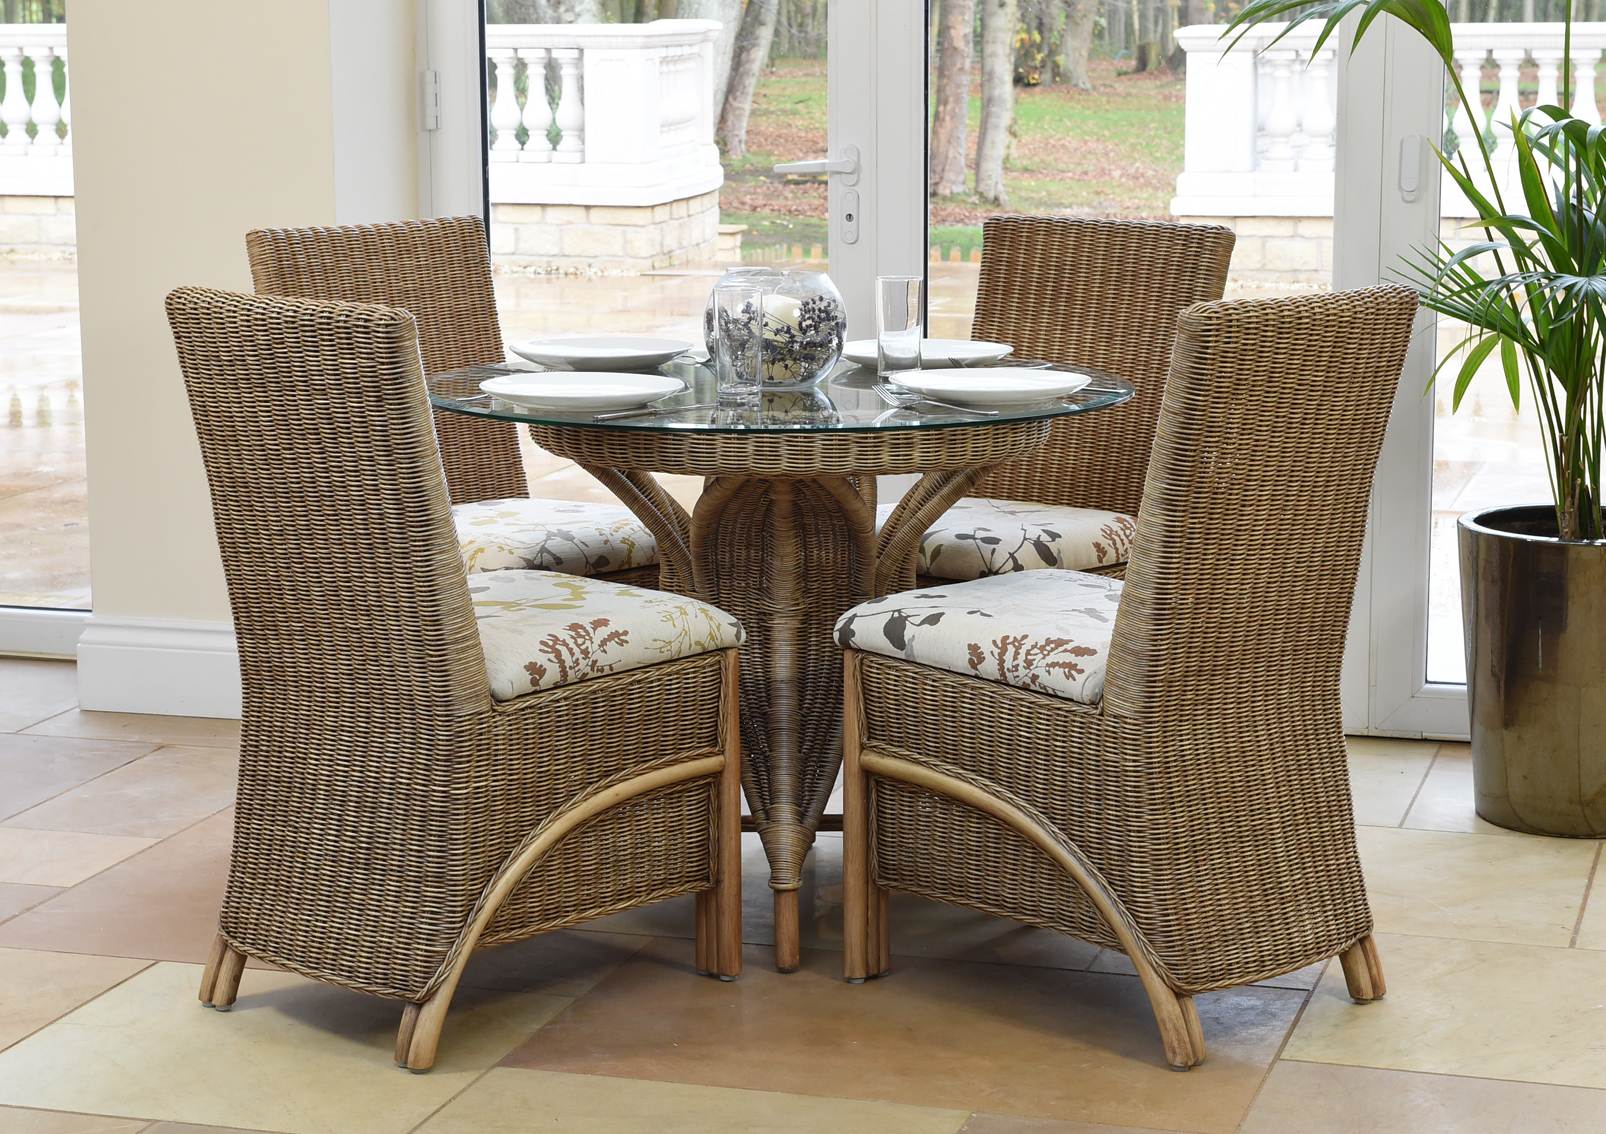 cane dining set in a conservatory